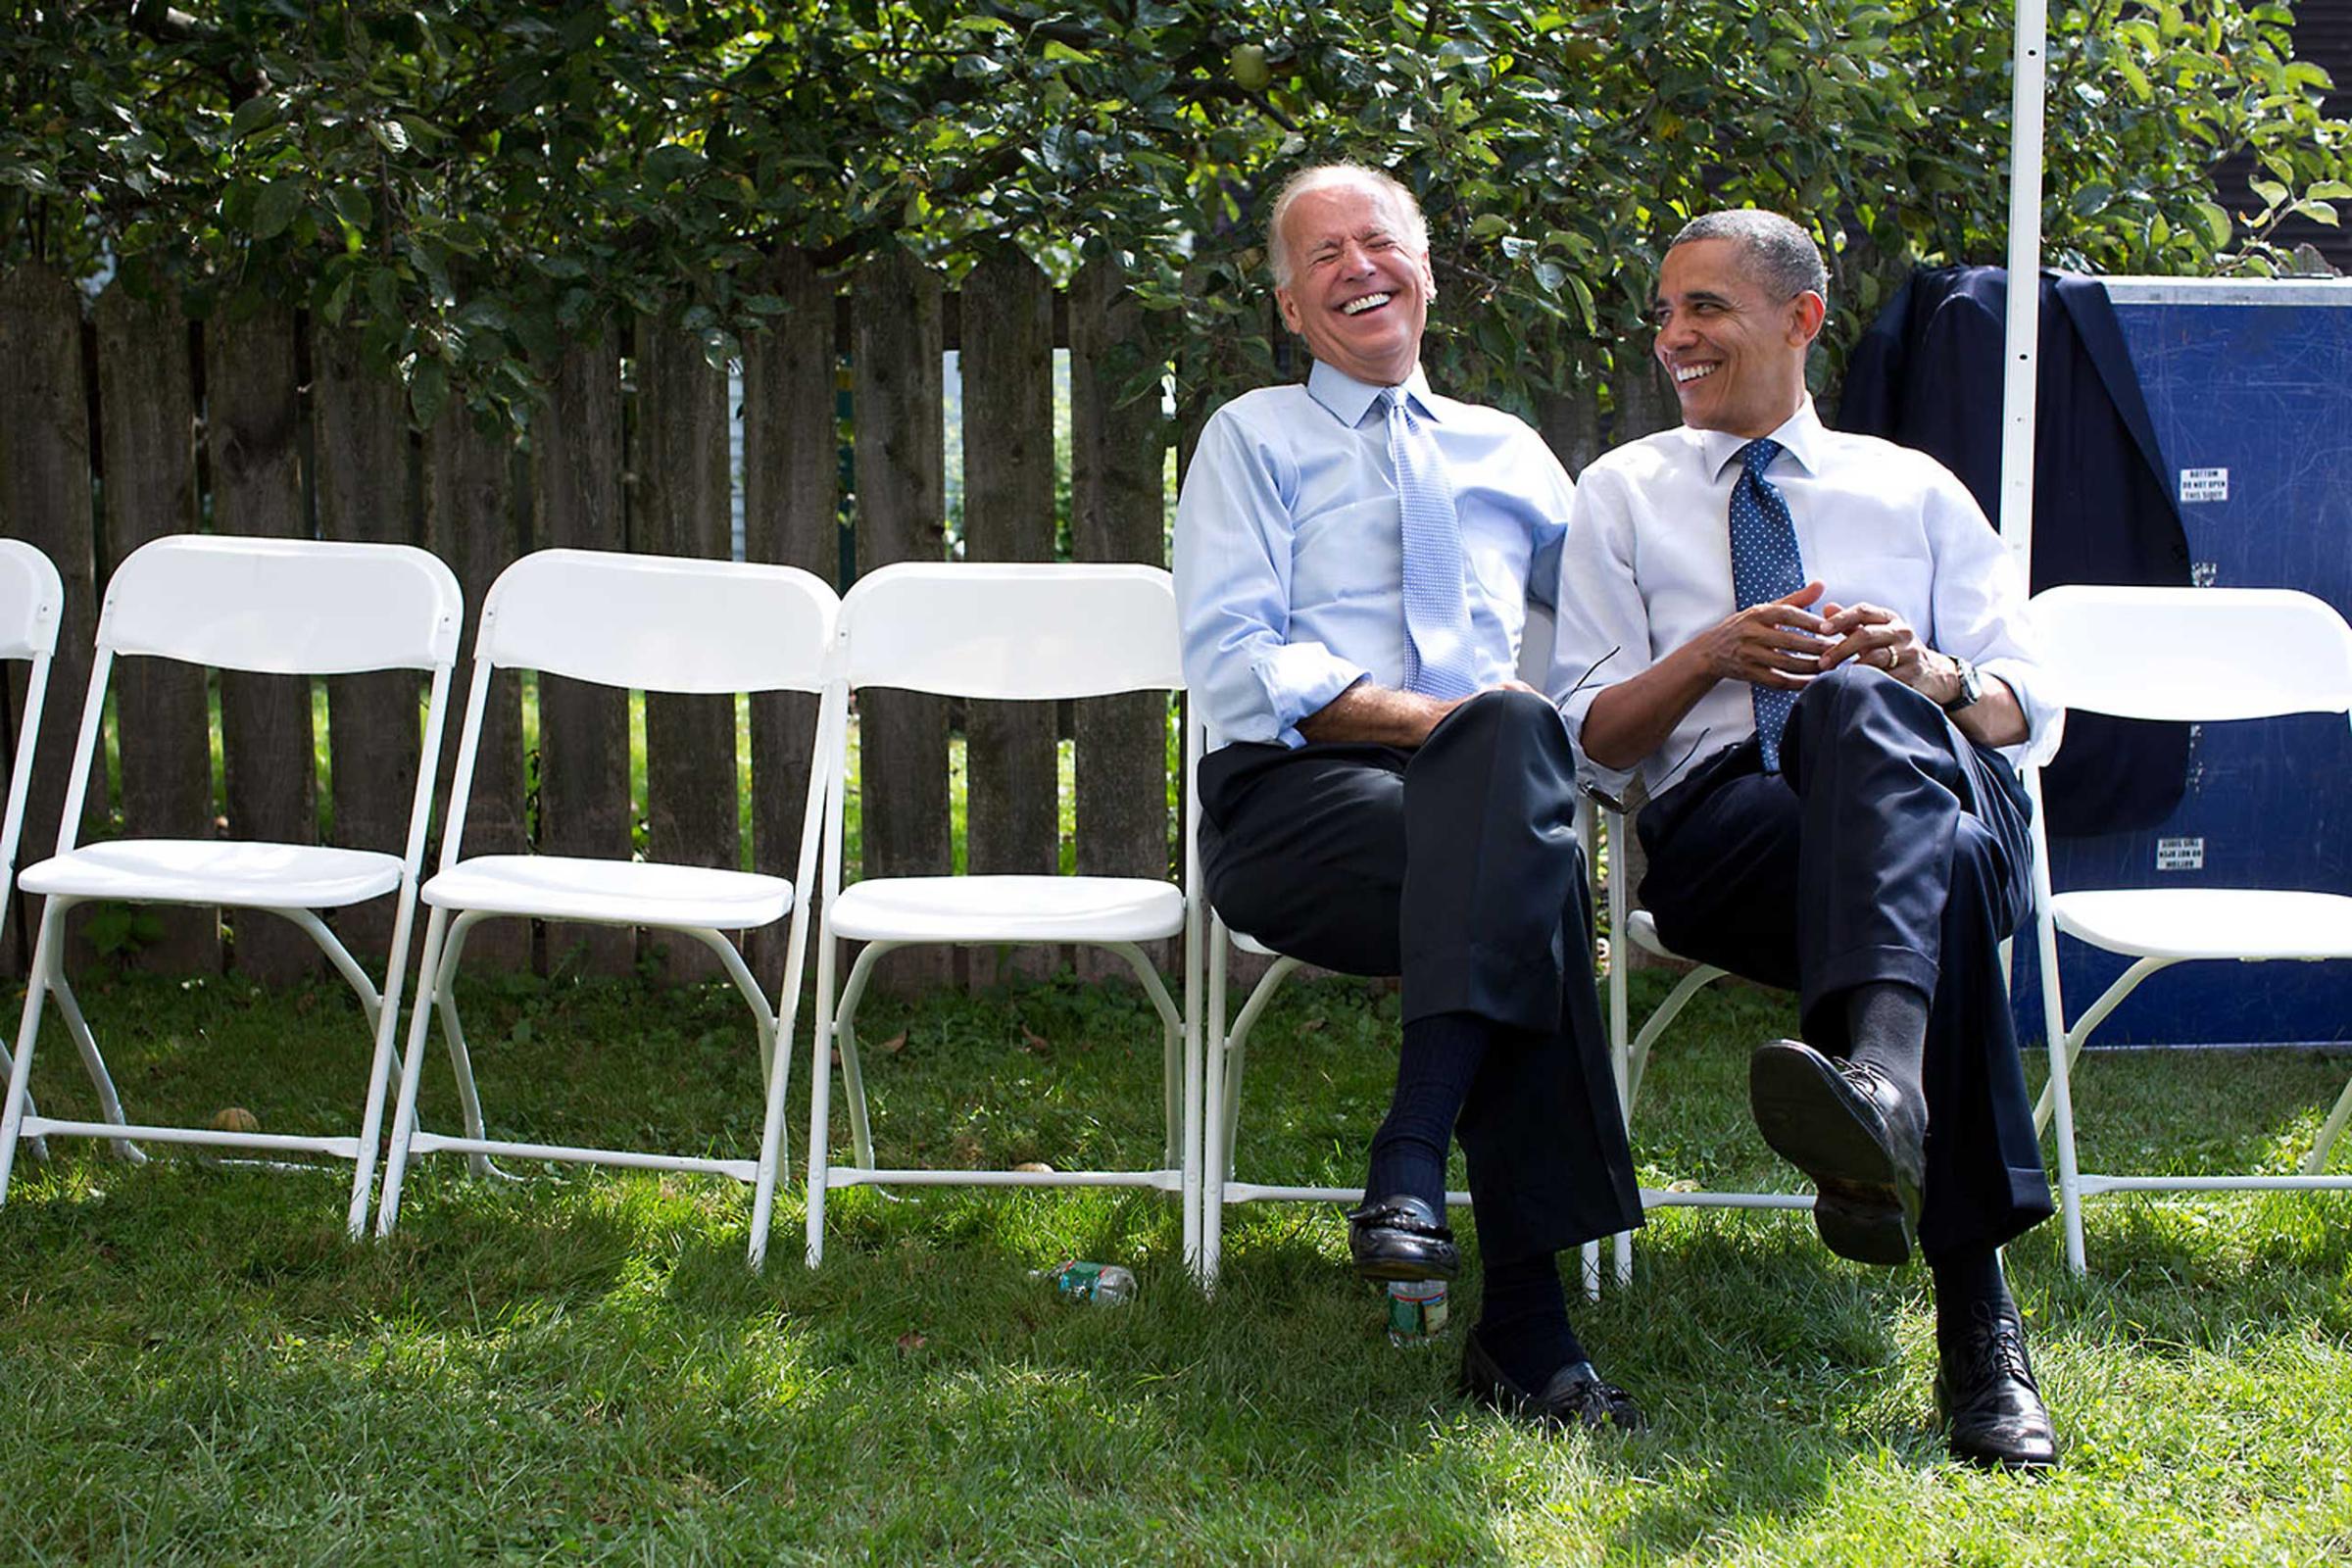 President Obama and Vice President Biden share a laugh before an event at Strawbery Banke Museum in Portsmouth, N.H., Sept. 7, 2012.